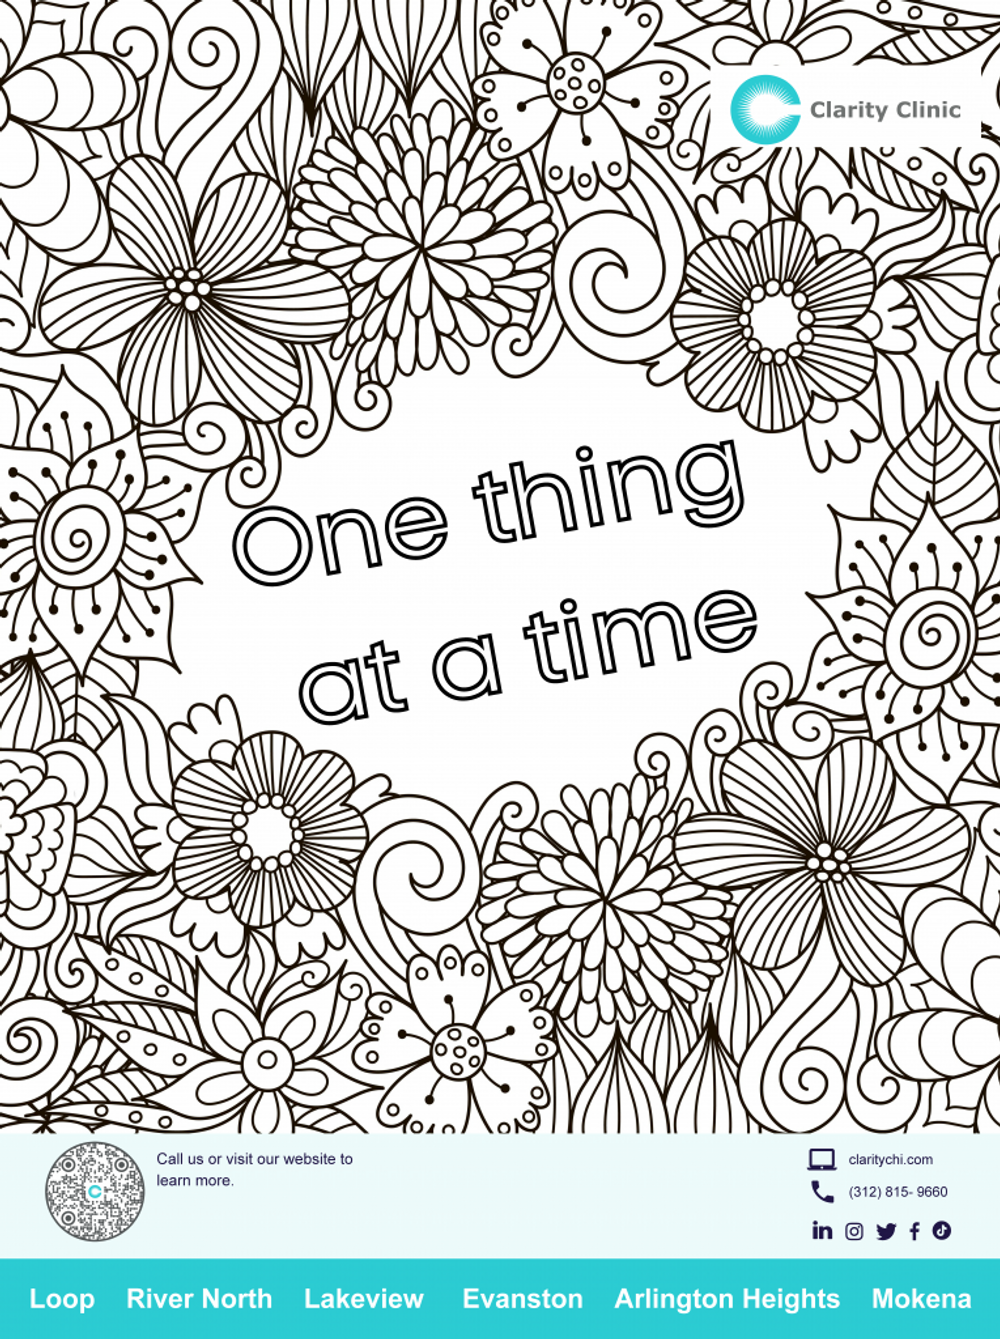 Clarity Clinic Coloring Sheet - One thing at a time